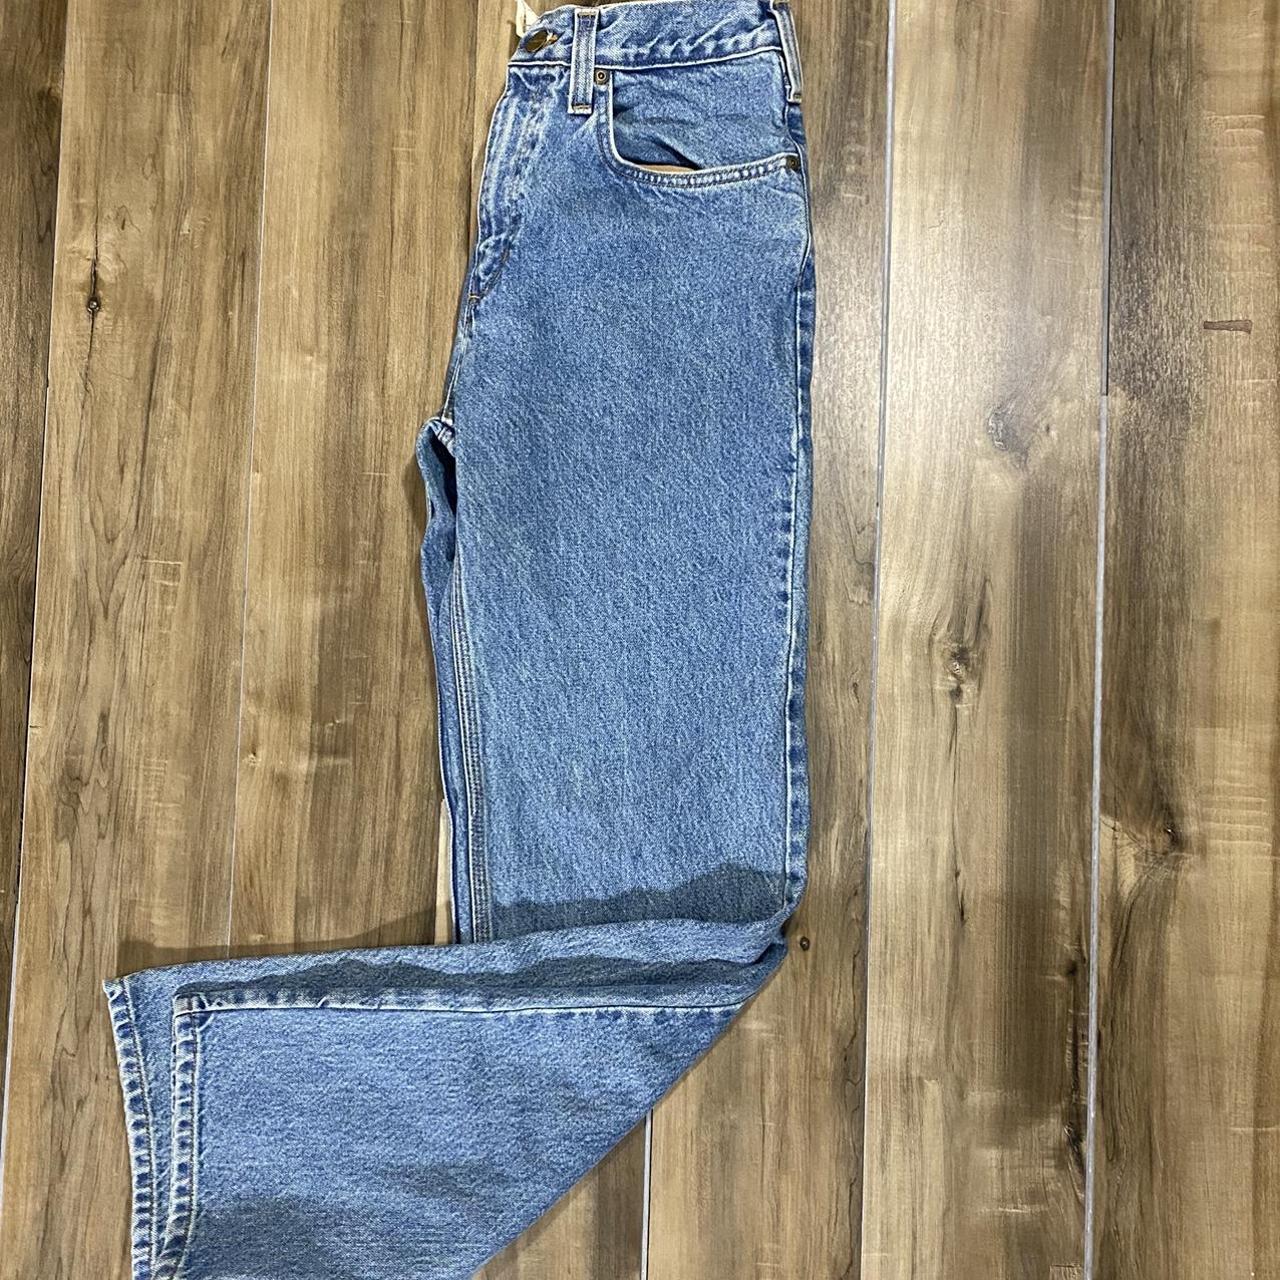 Product Image 3 - Vintage 90s Carhartt jeans! These